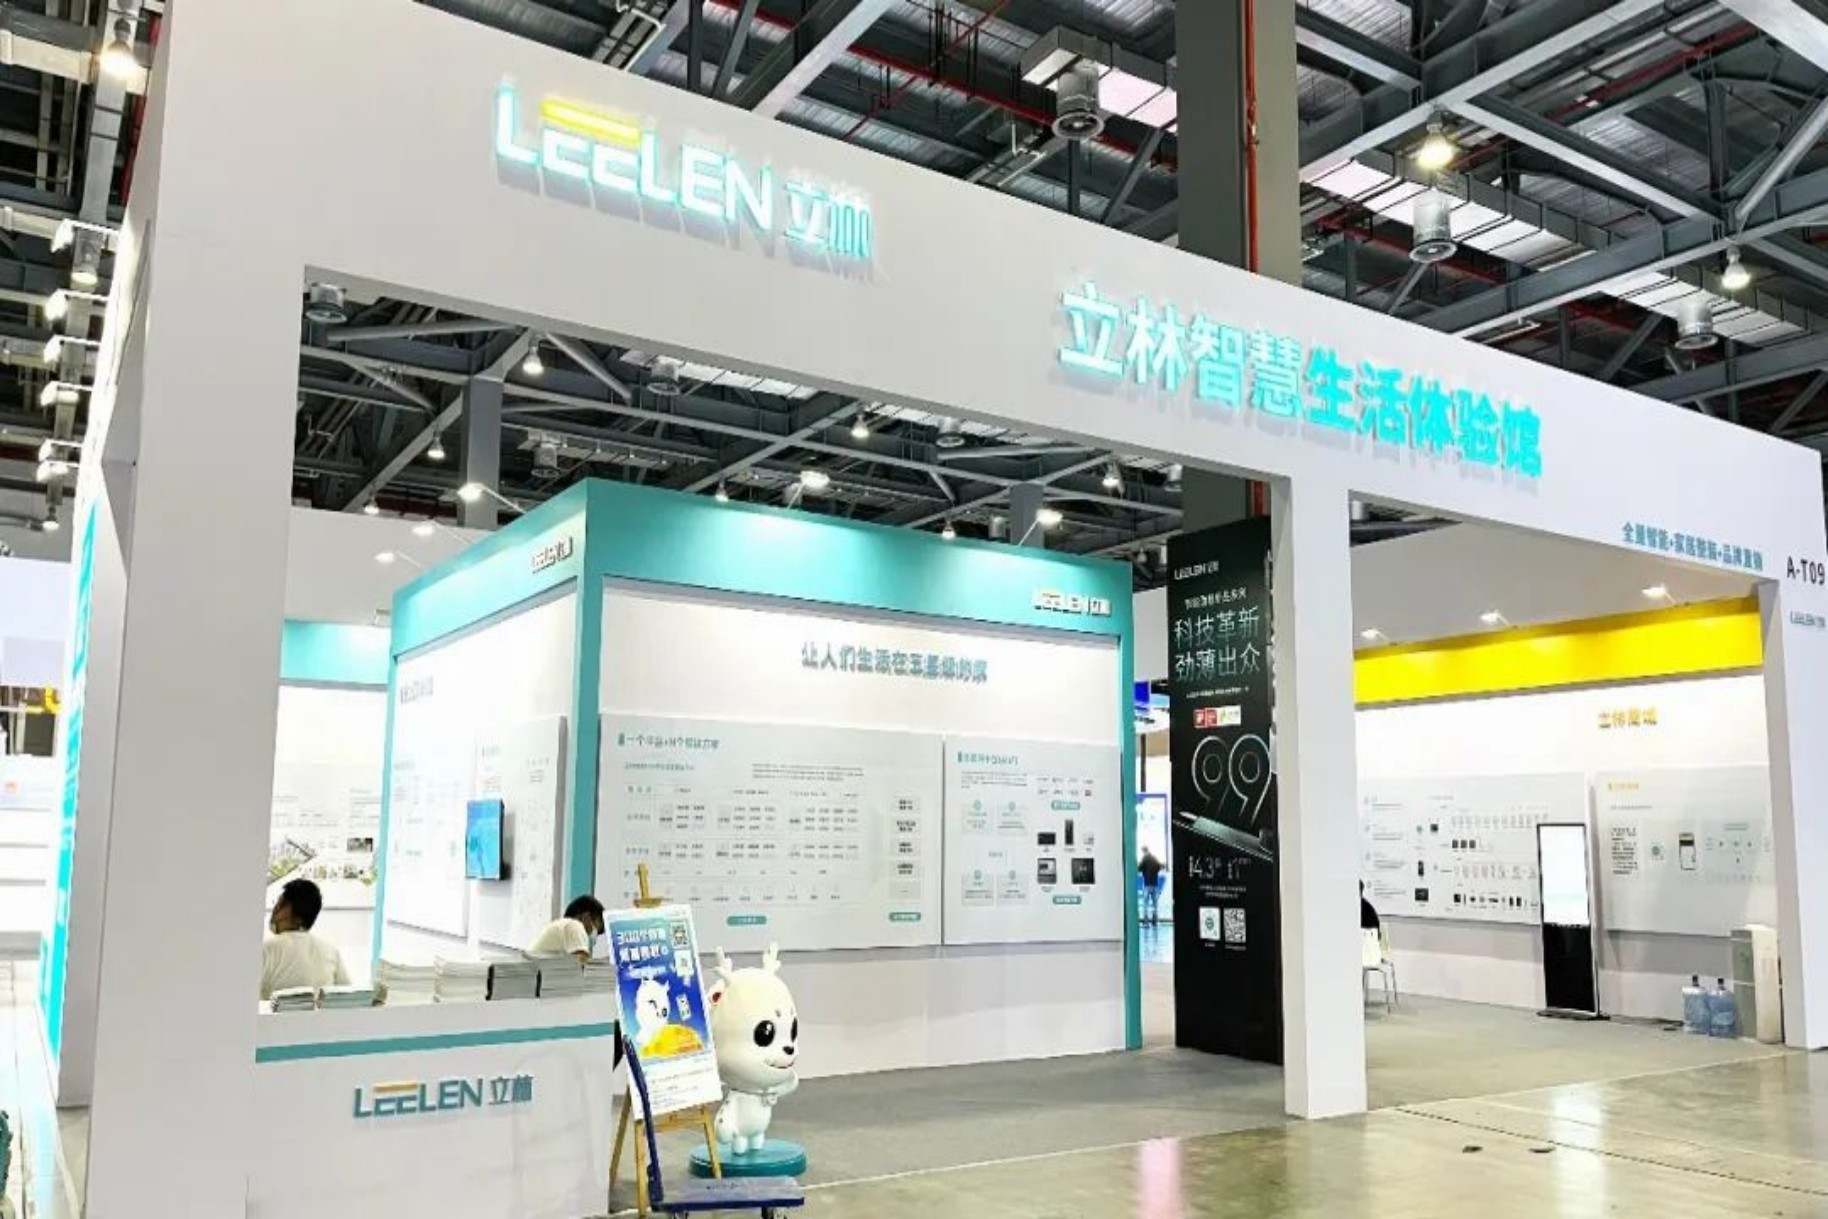 LEELEN participated in the China International Communication Electronics Industry Conference and Consumer Electronics Expo